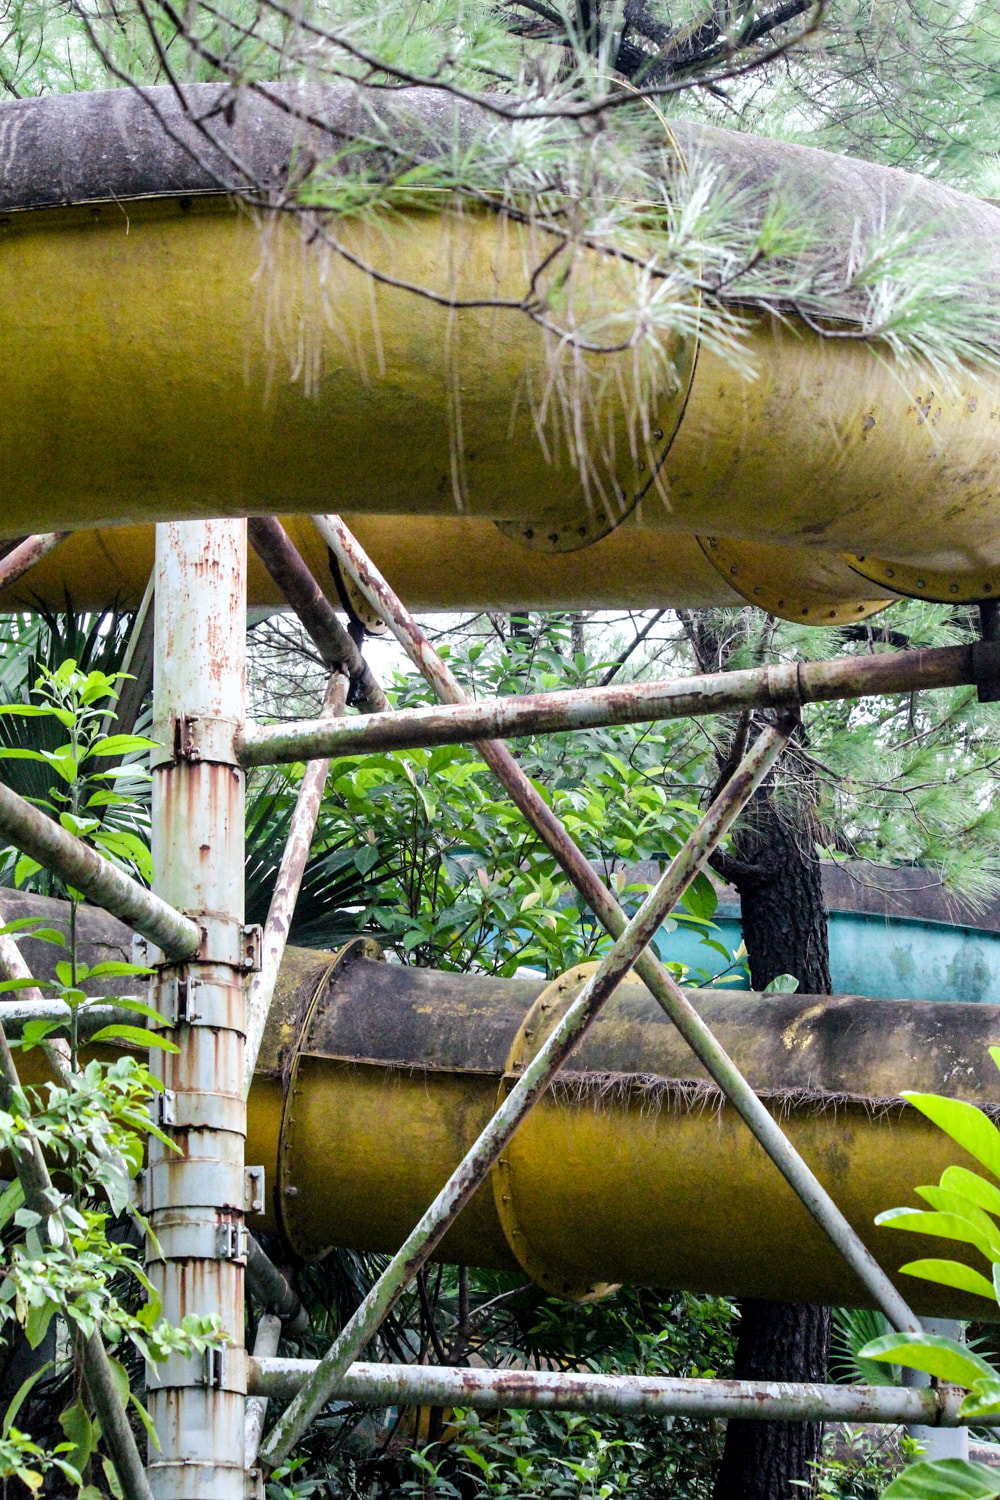 Detail of the large yellow water slide // Hue: Ho Thuy Tien, Photos of Vietnam's Abandoned Water Park.